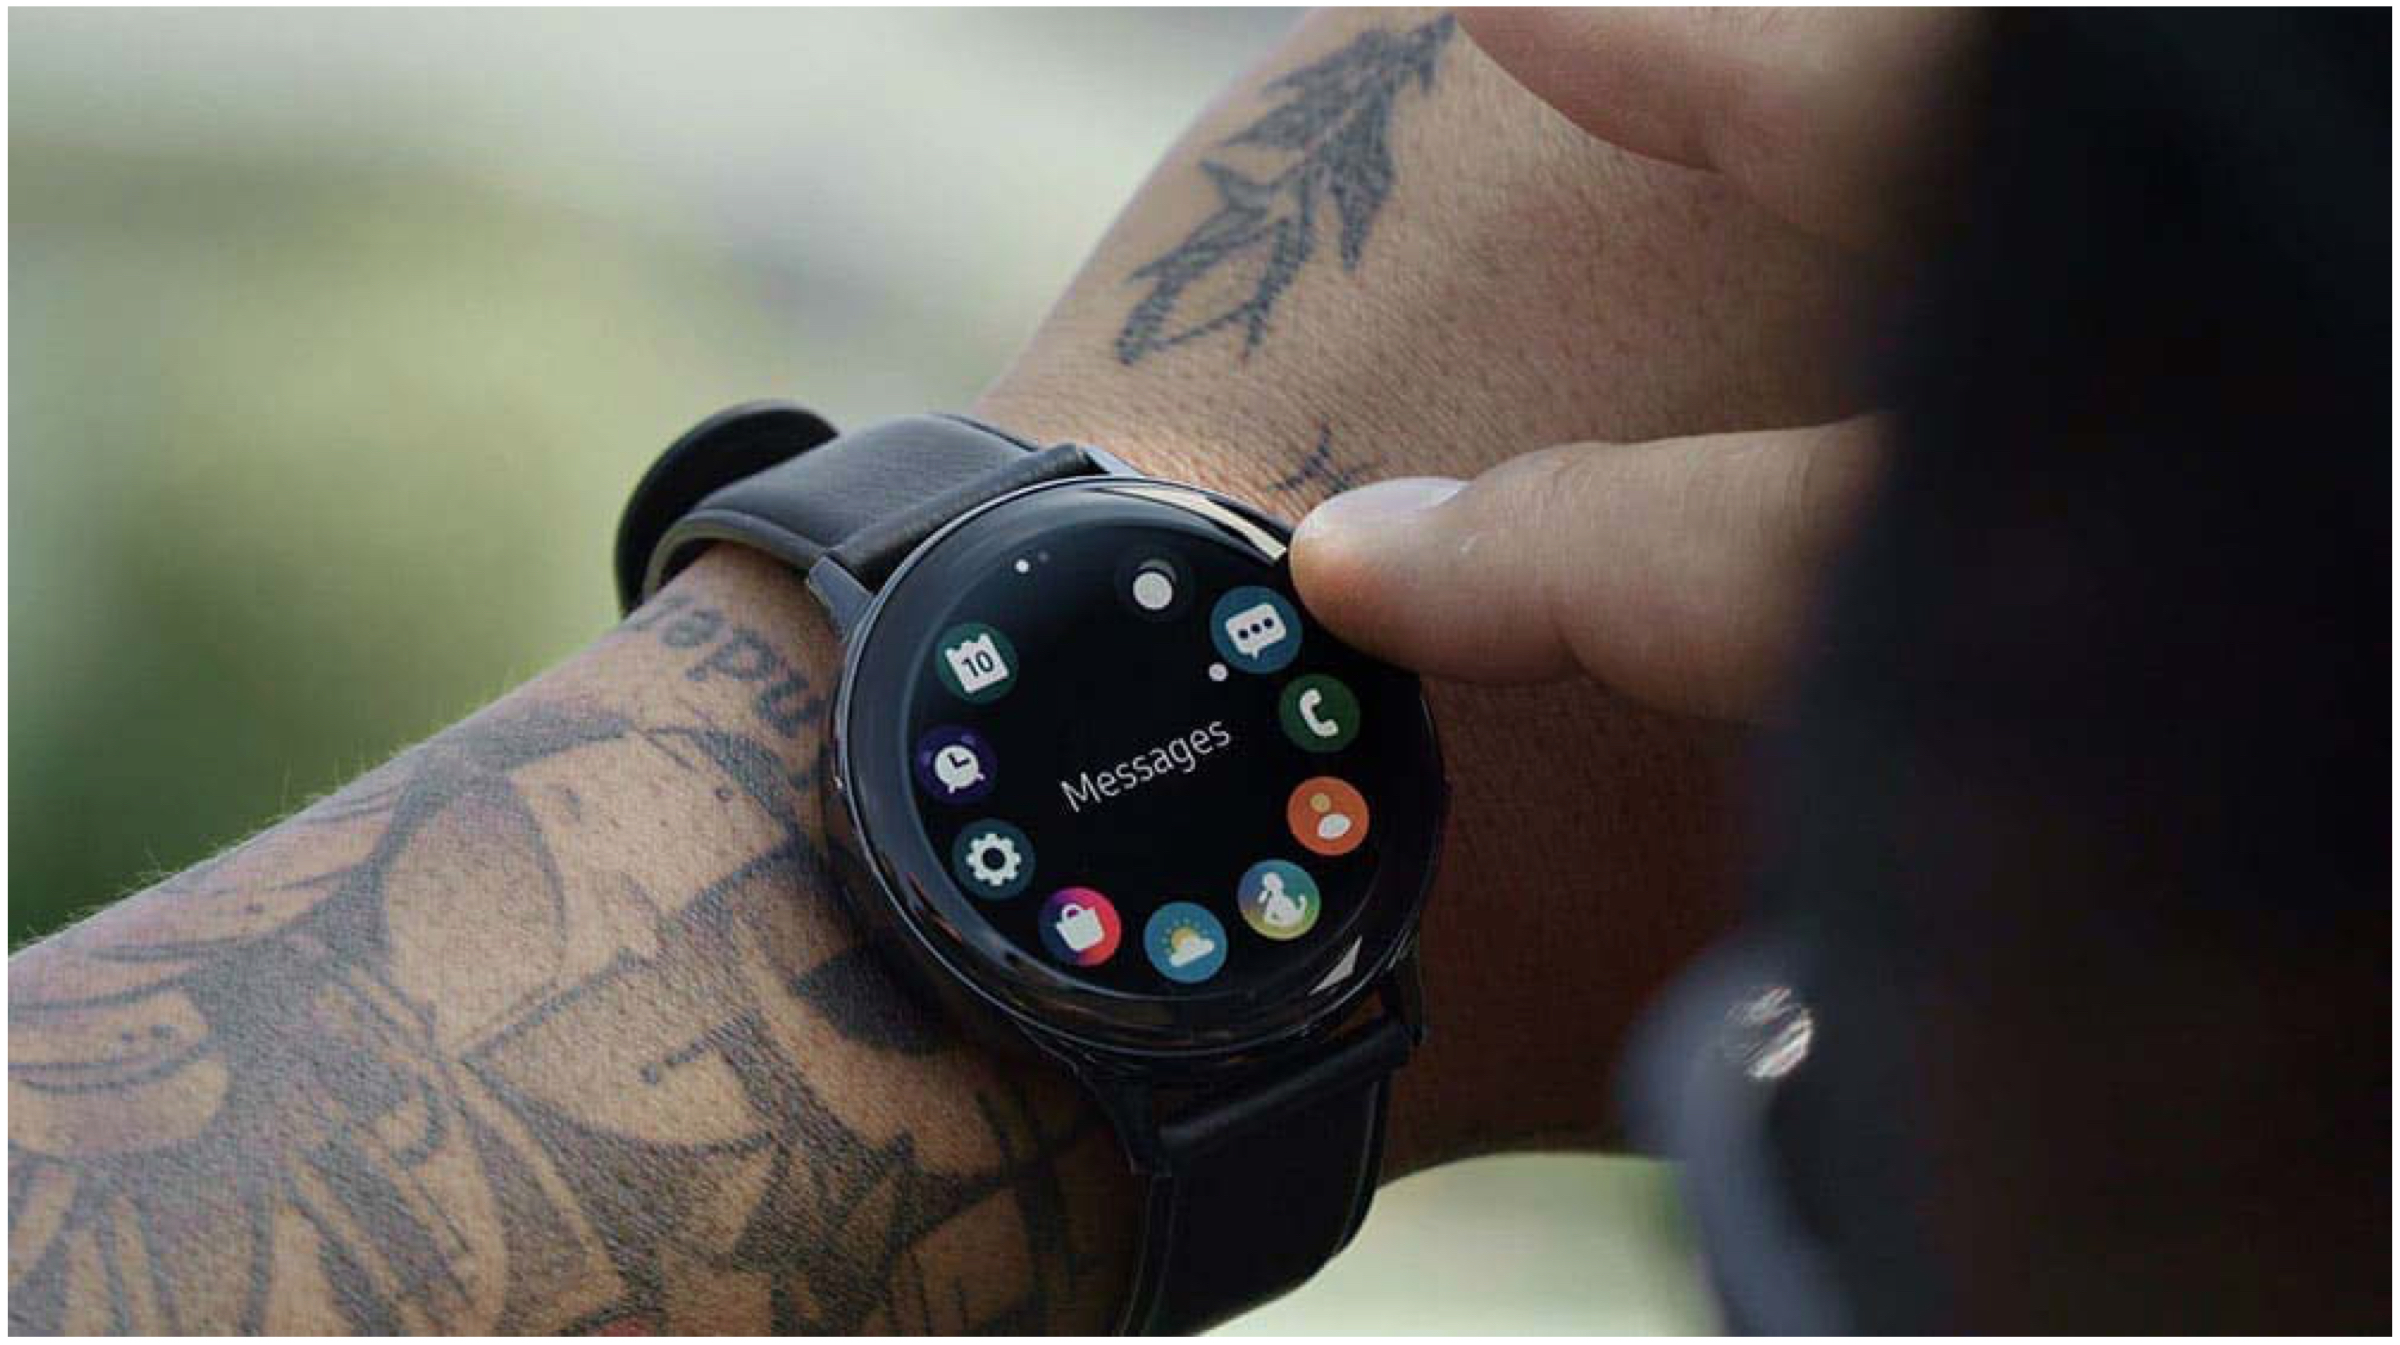 Samsung Galaxy Watch Active 2 Launched, Full Specs & Price iGyaan